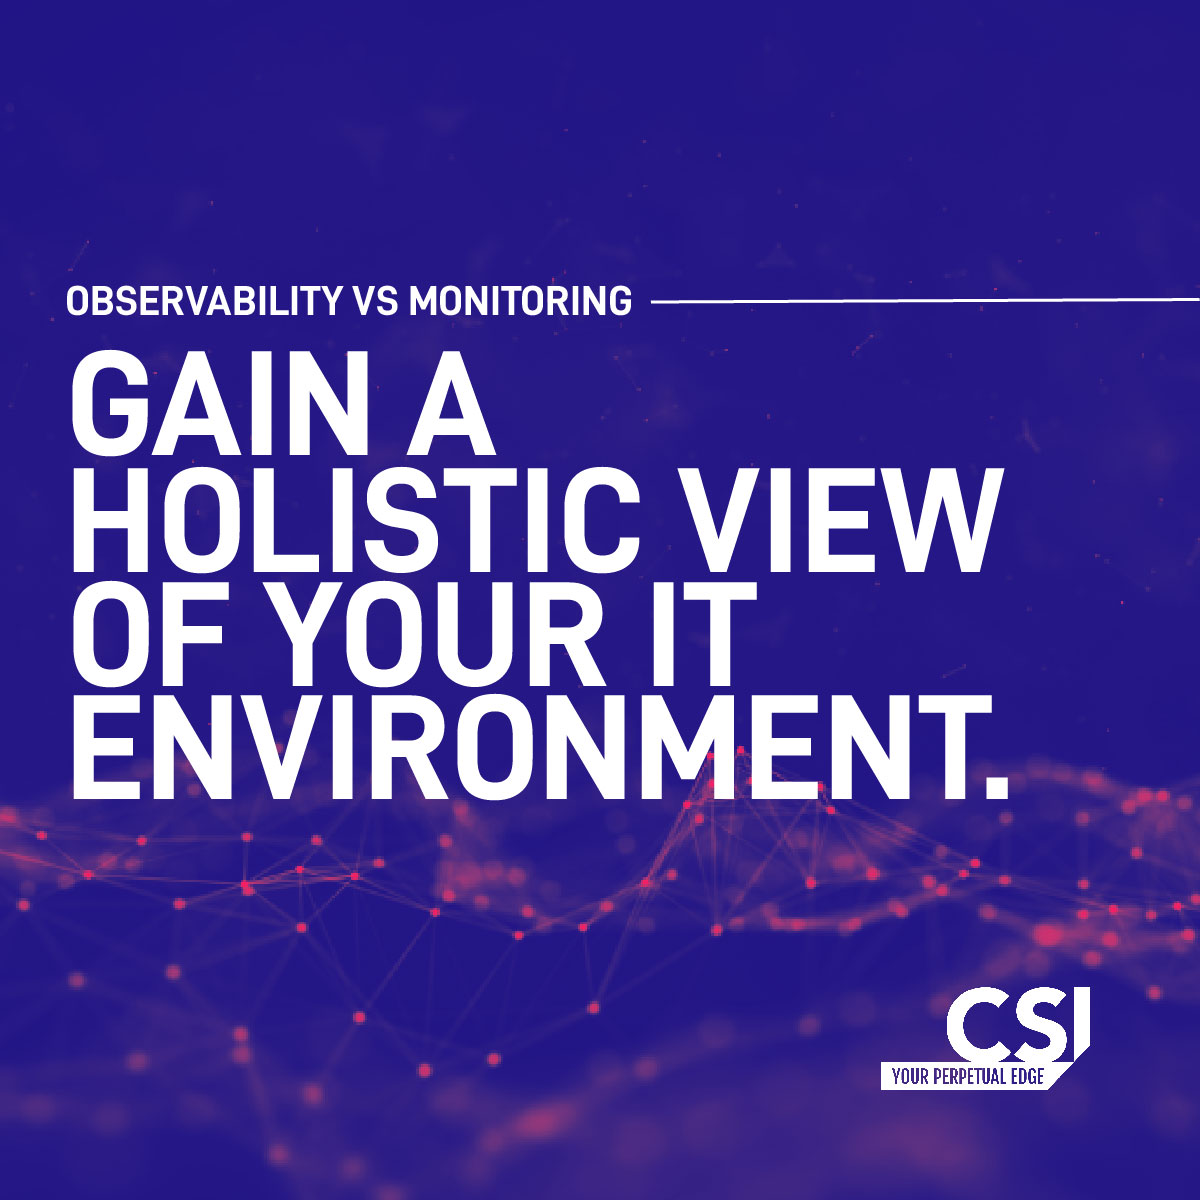 Observability and monitoring unlcock a bigger picture about your IT. 